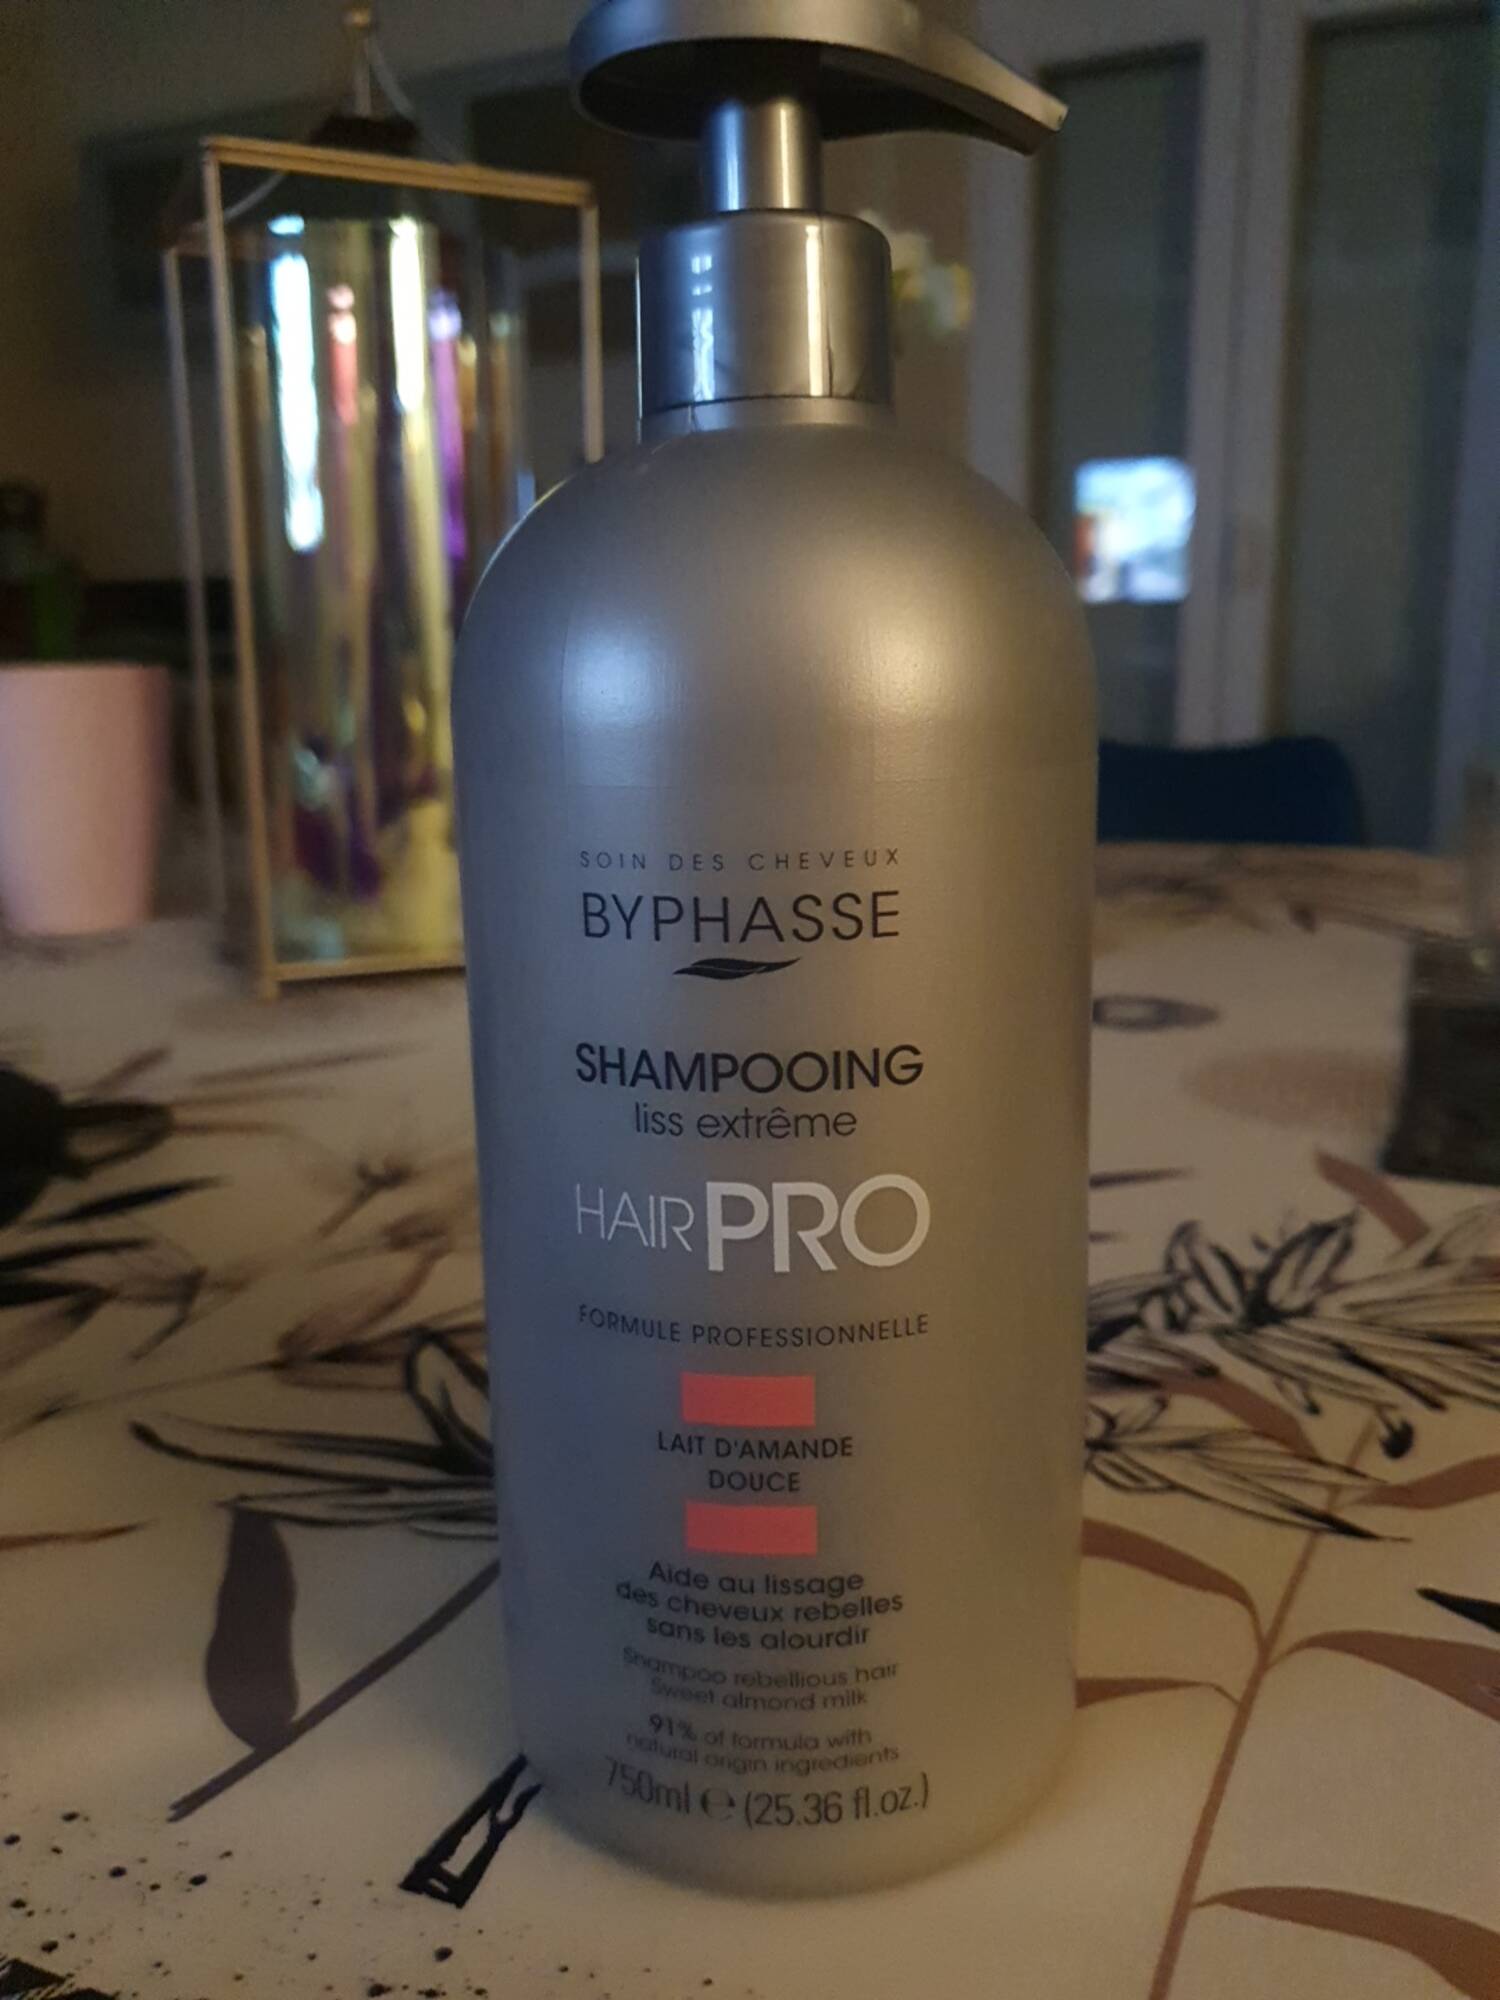 BYPHASSE - Shampooing liss extrême